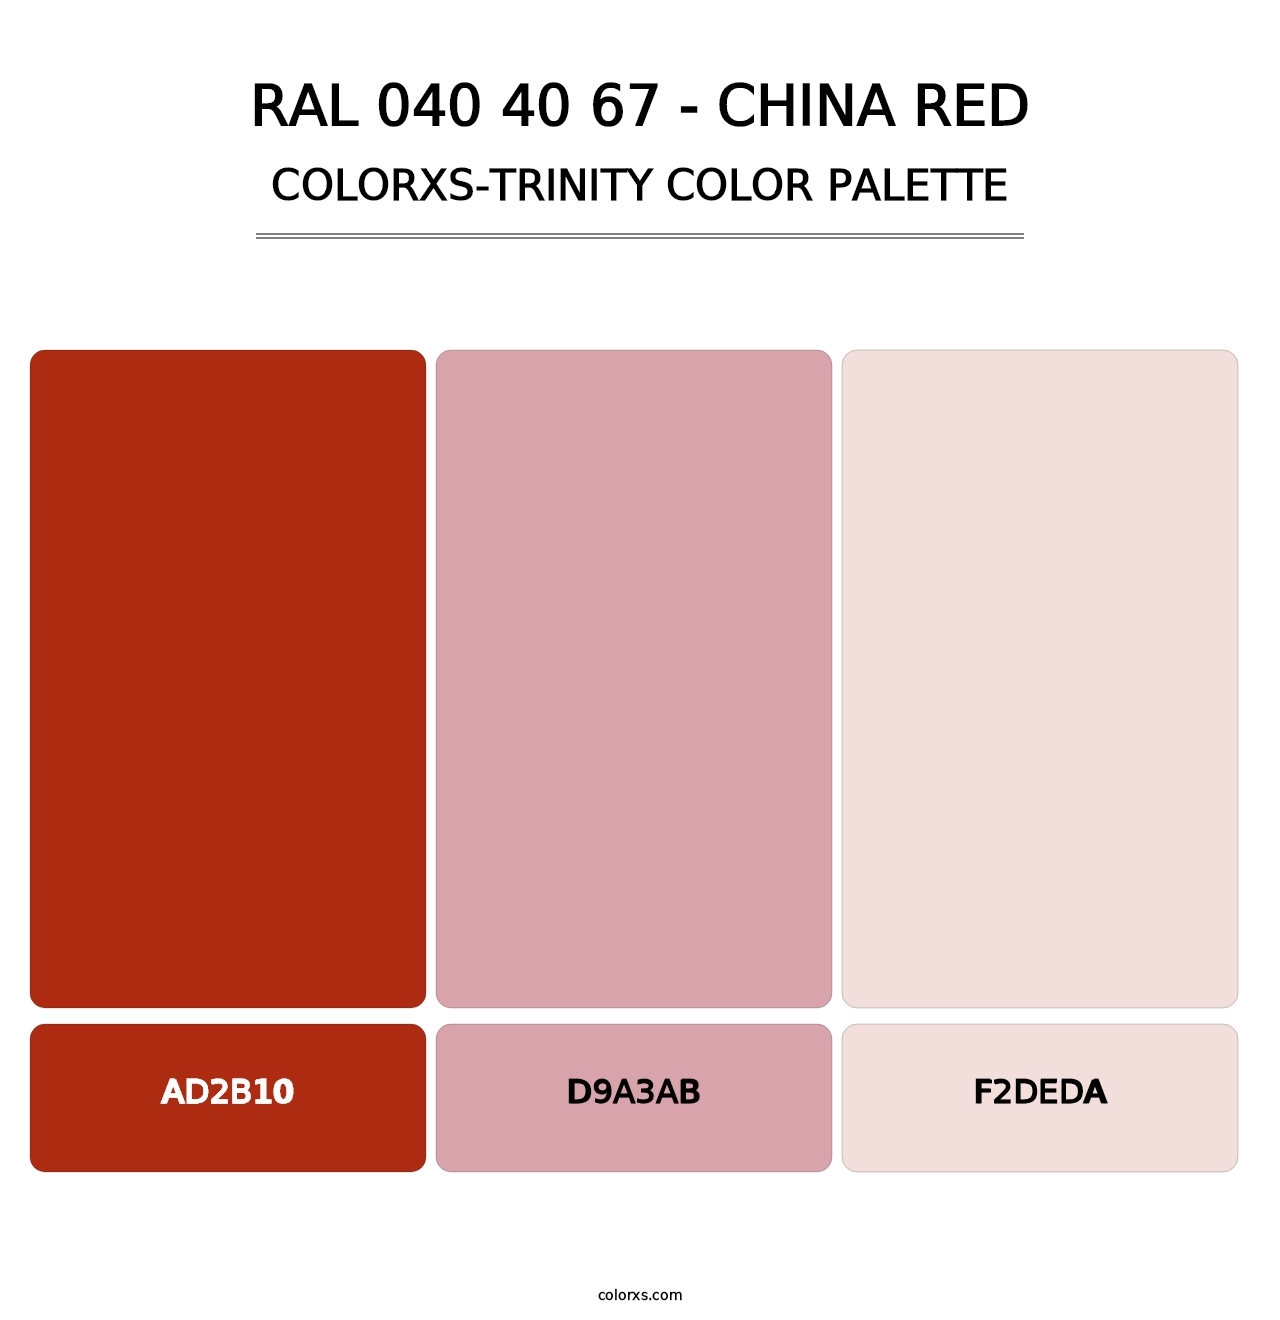 RAL 040 40 67 - China Red - Colorxs Trinity Palette